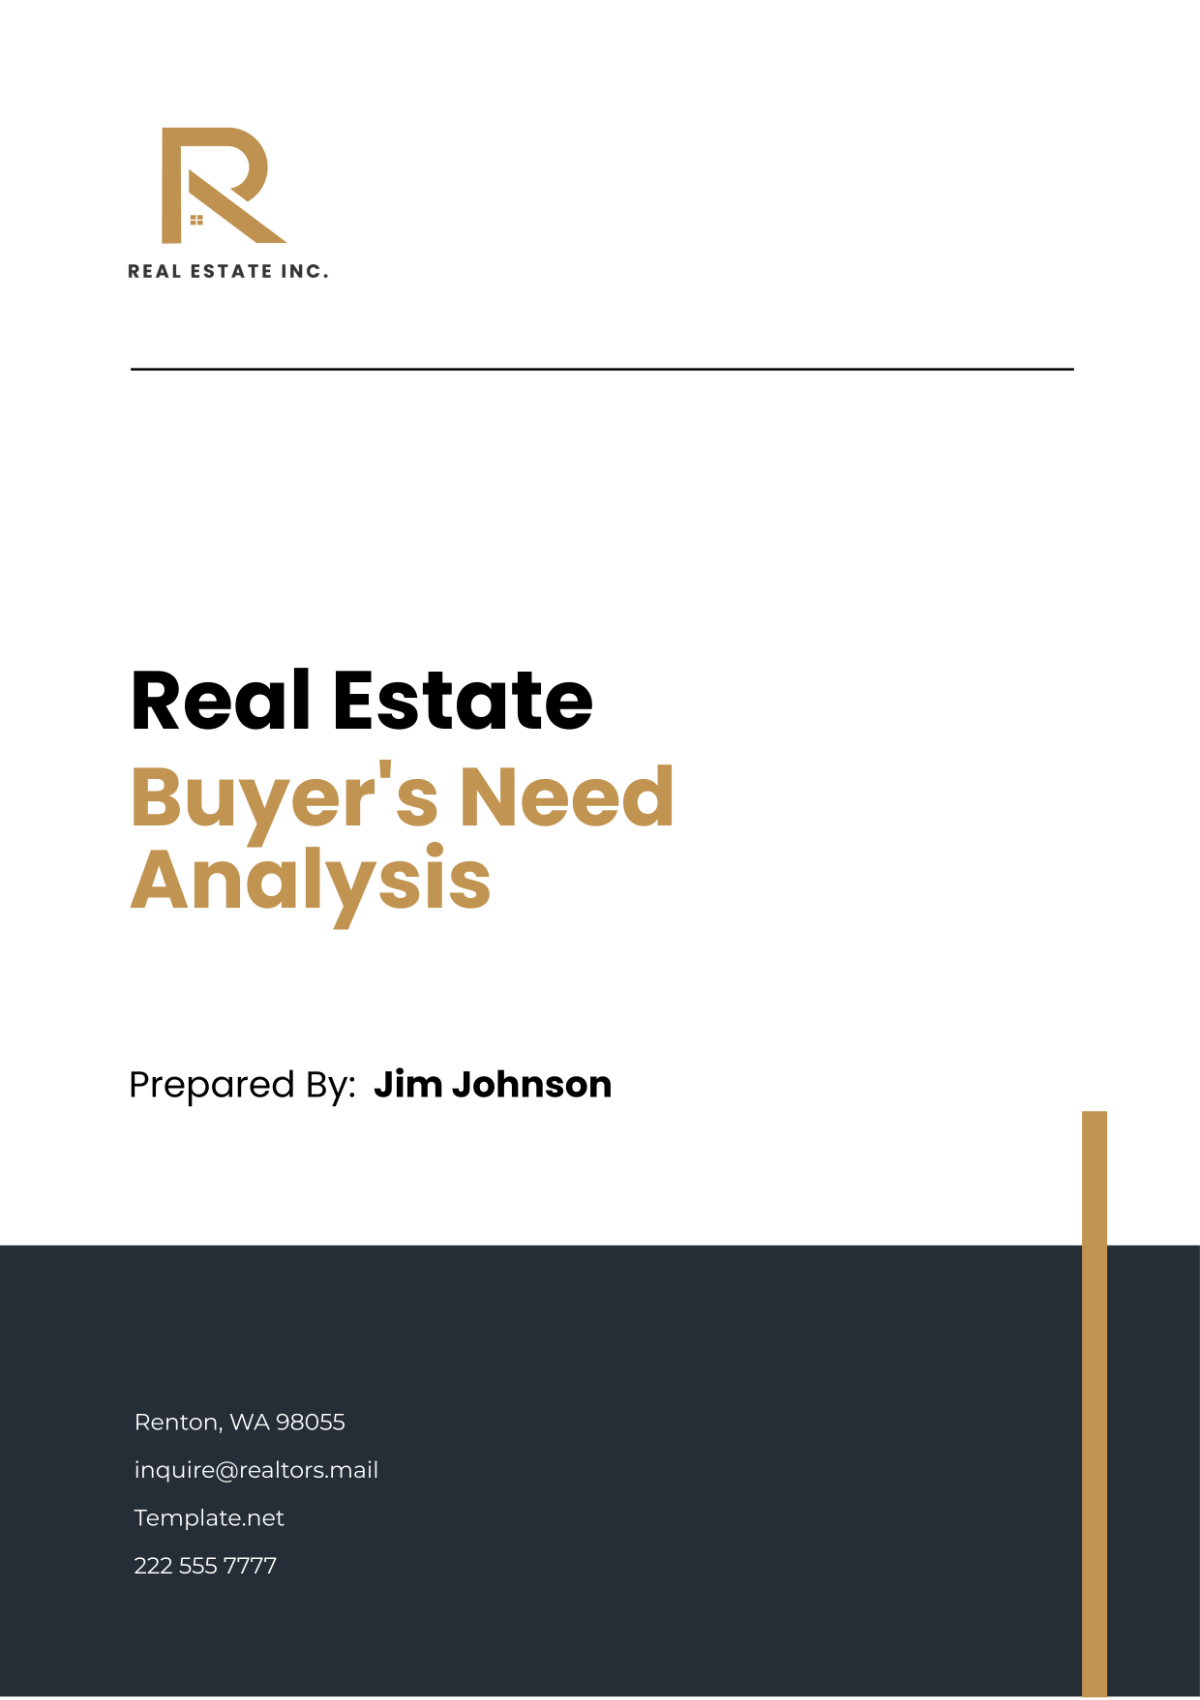 Real Estate Buyer's Need Analysis Template